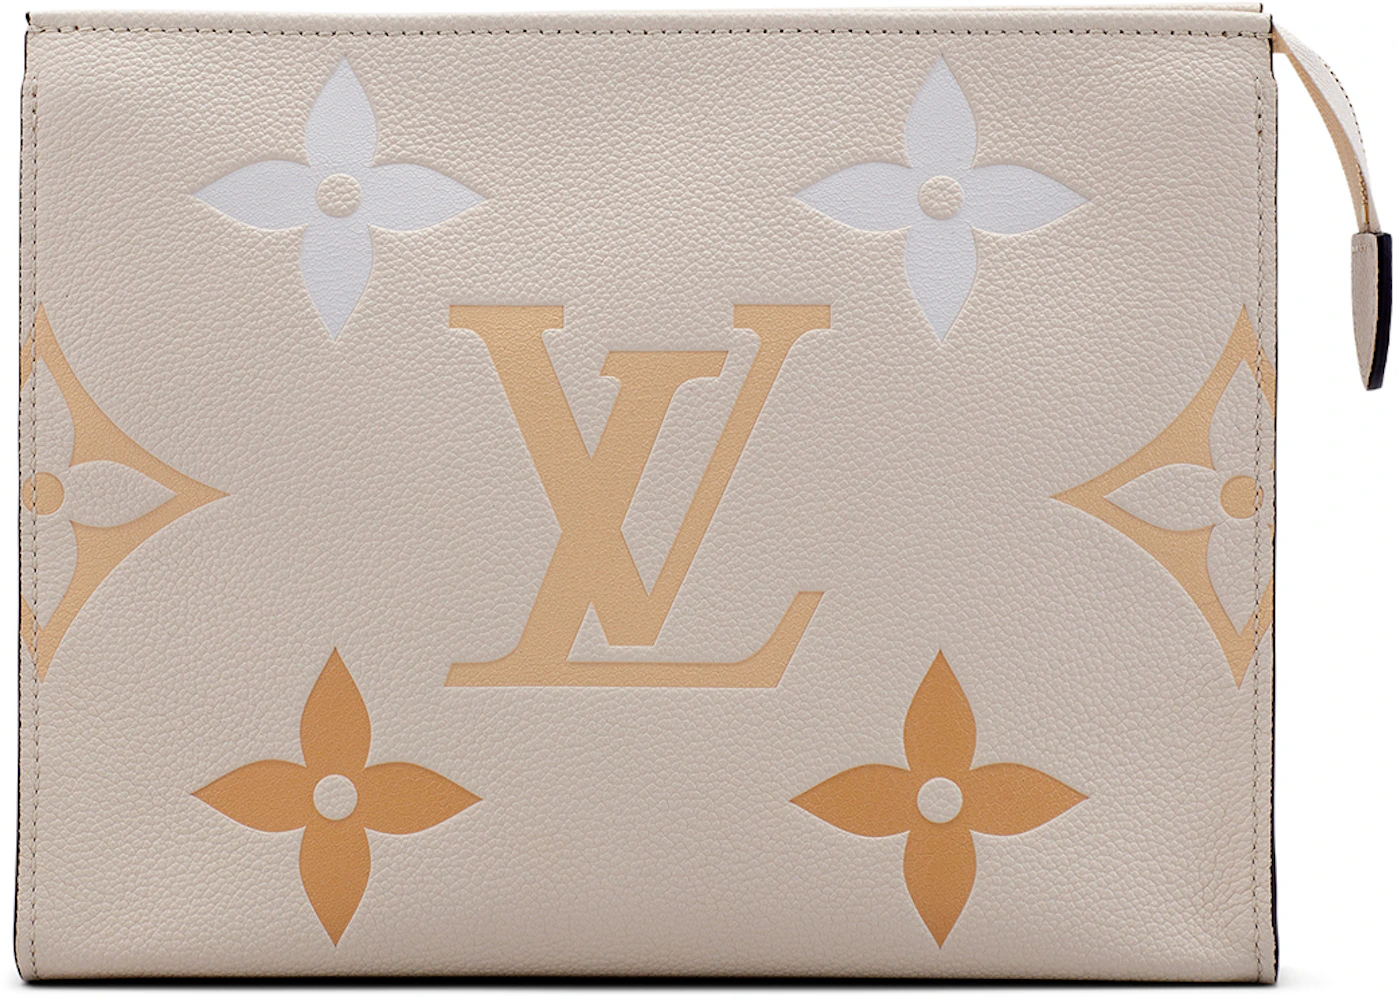 YOU CAN STILL BUY NEW! - Louis Vuitton Toiletry 26, 19, 15 